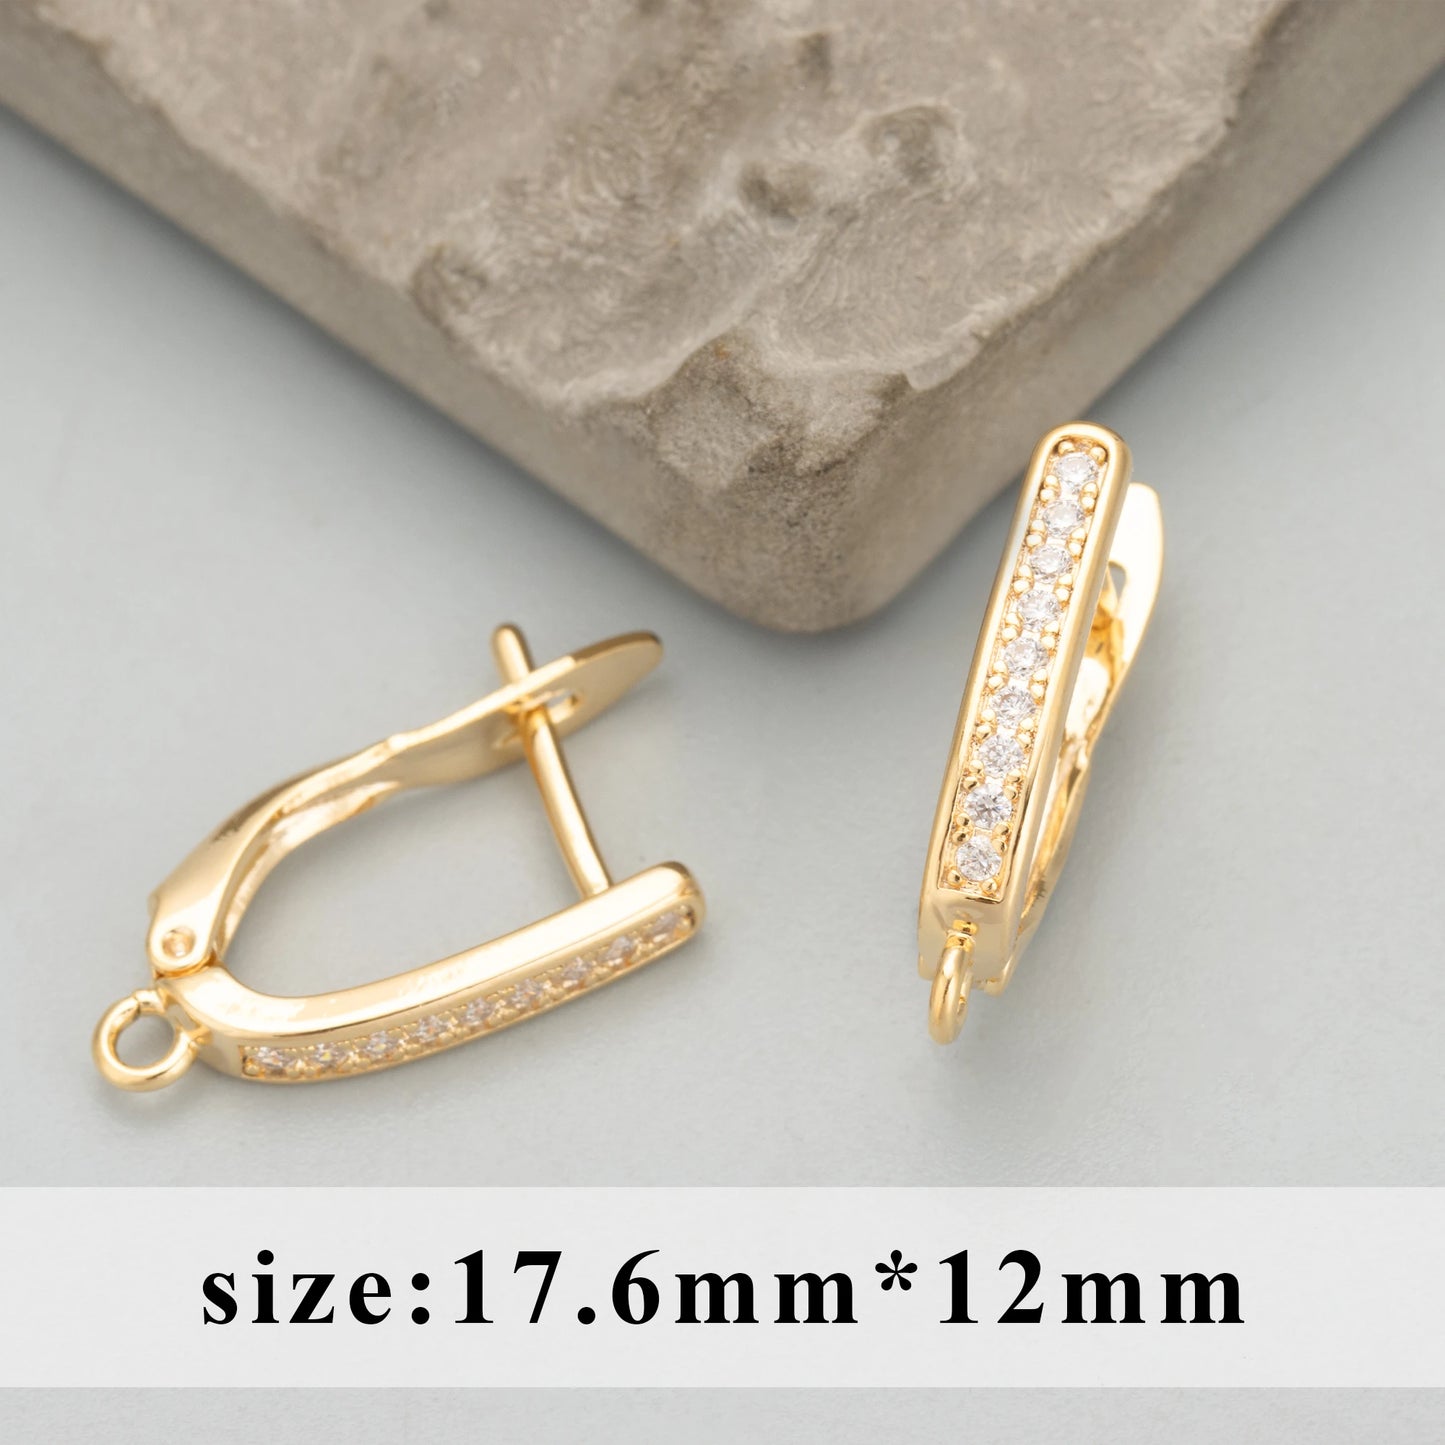 GUFEATHER MC85,jewelry accessories,18k gold rhodium plated,nickel free,copper,zircon,charms,clasp hooks,jewelry making,10pcs/lot